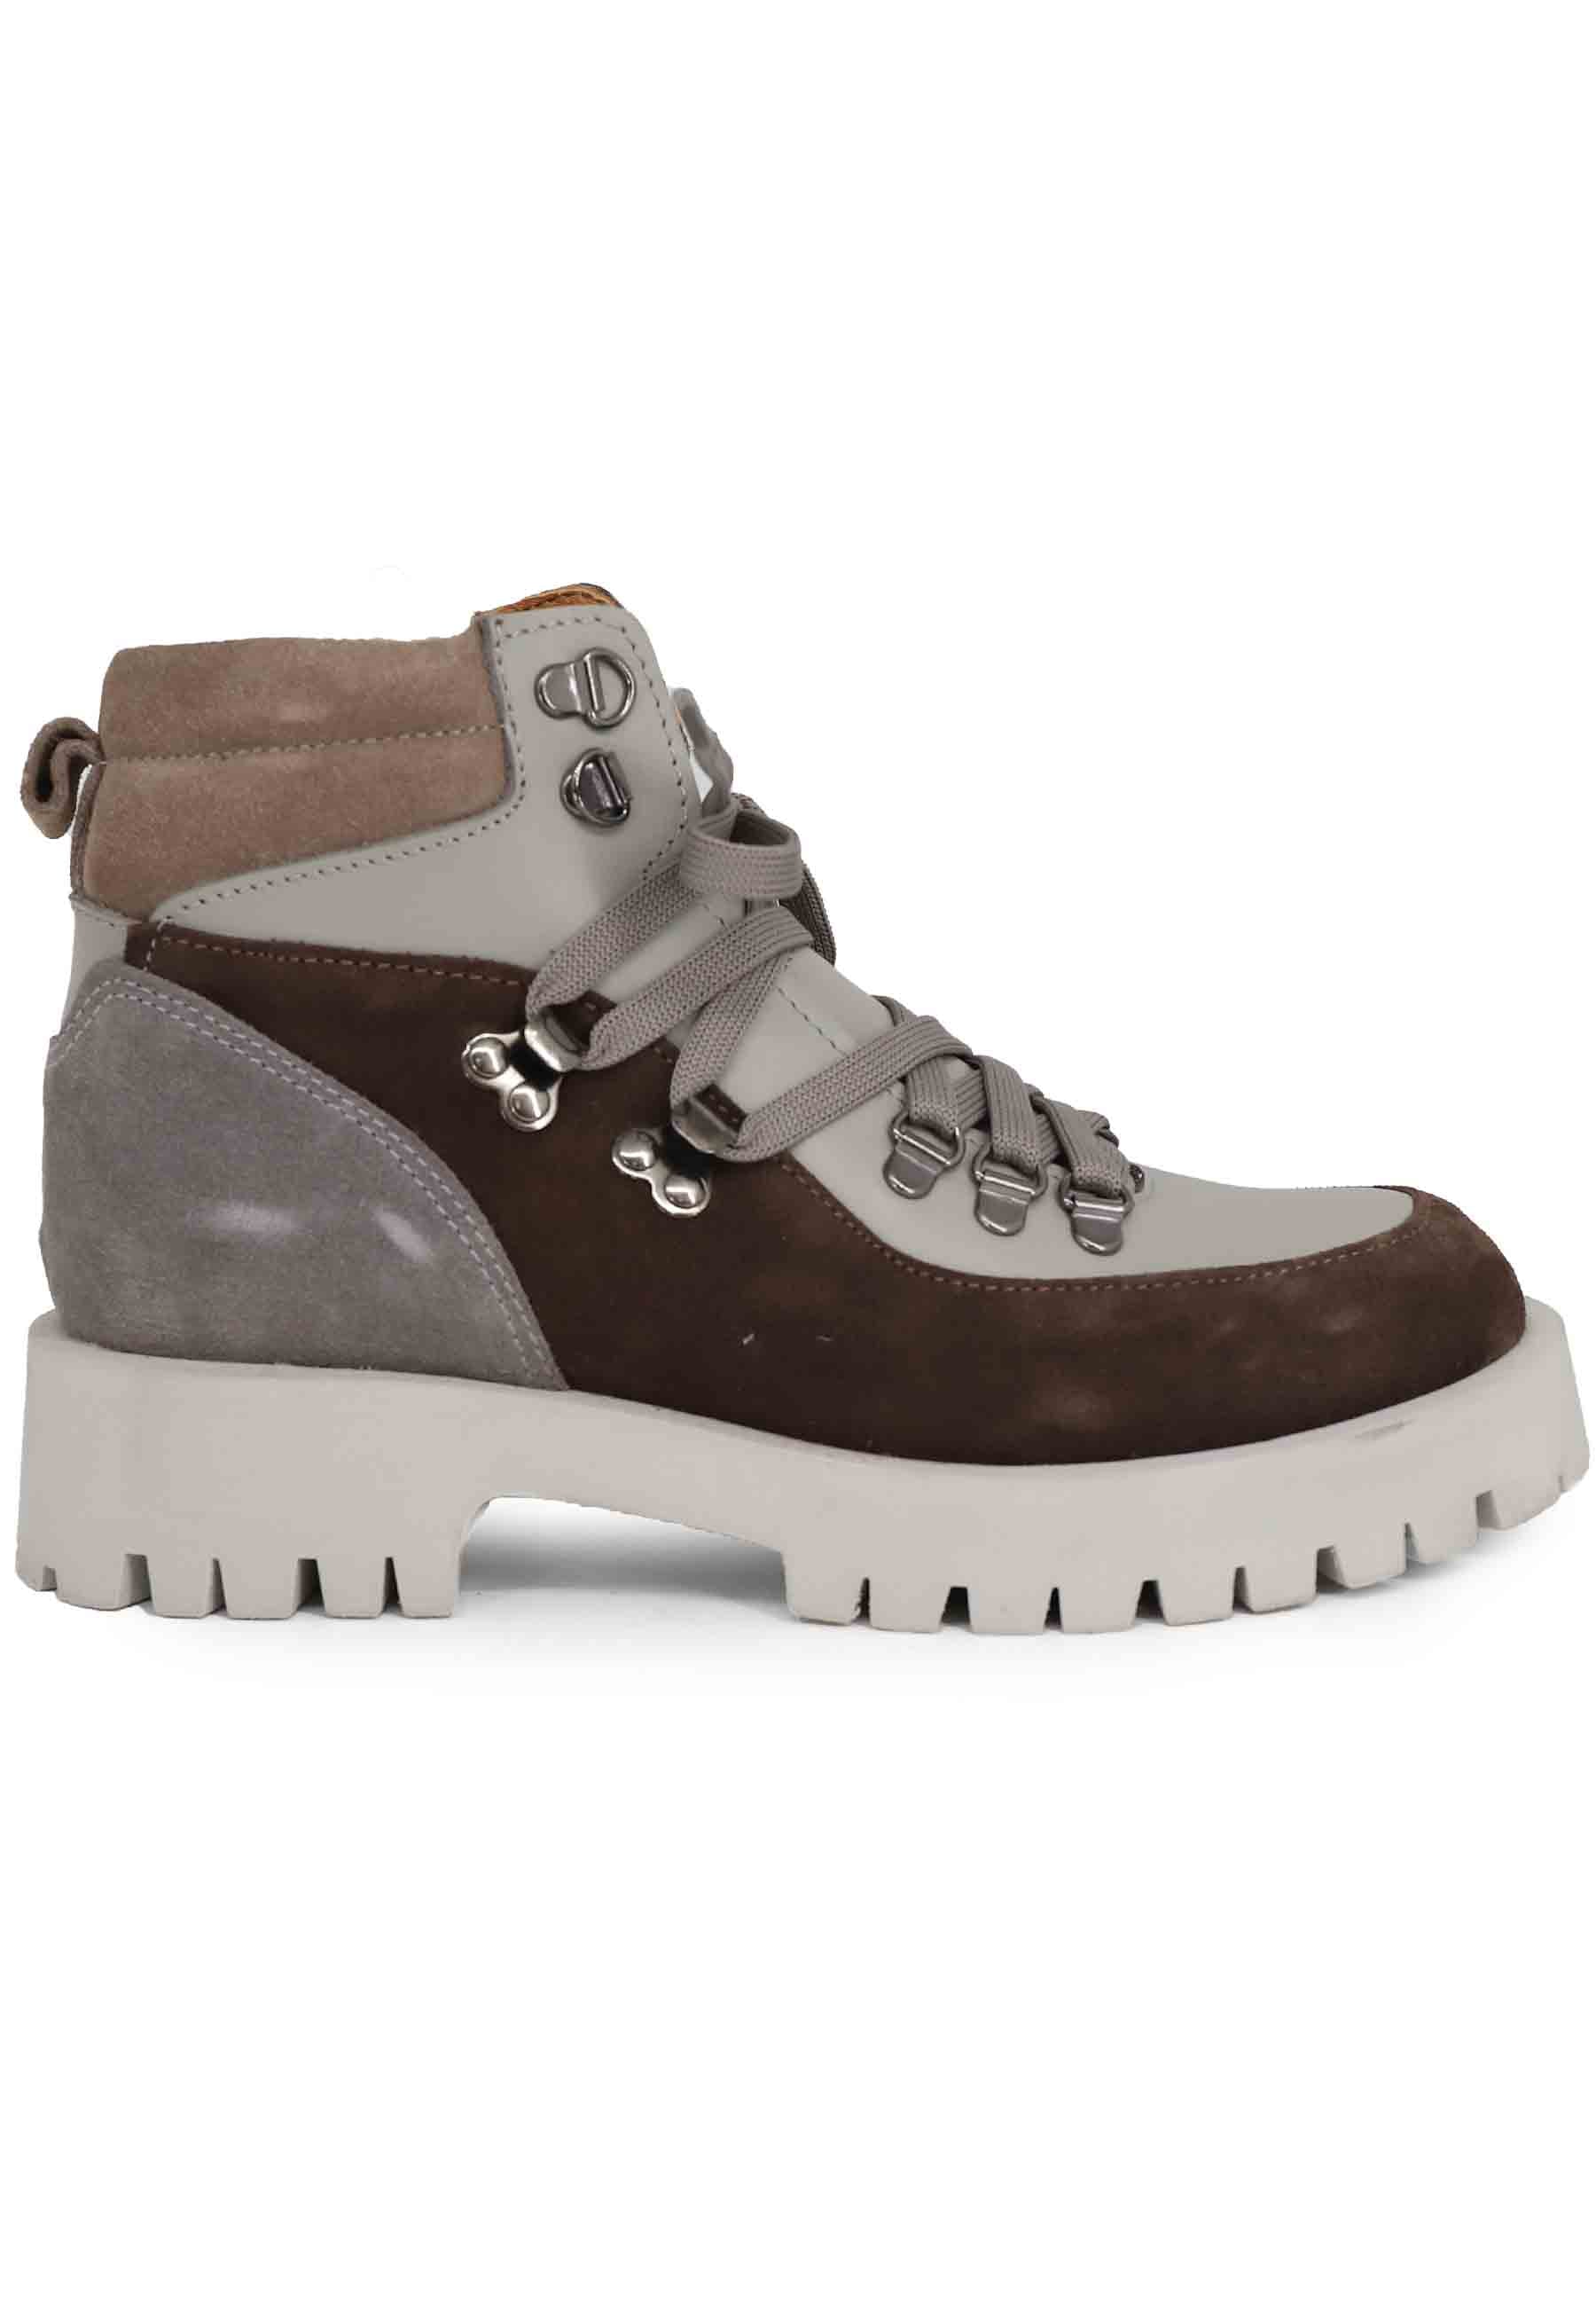 Women's trekking boots in gray leather and brown suede with lug sole